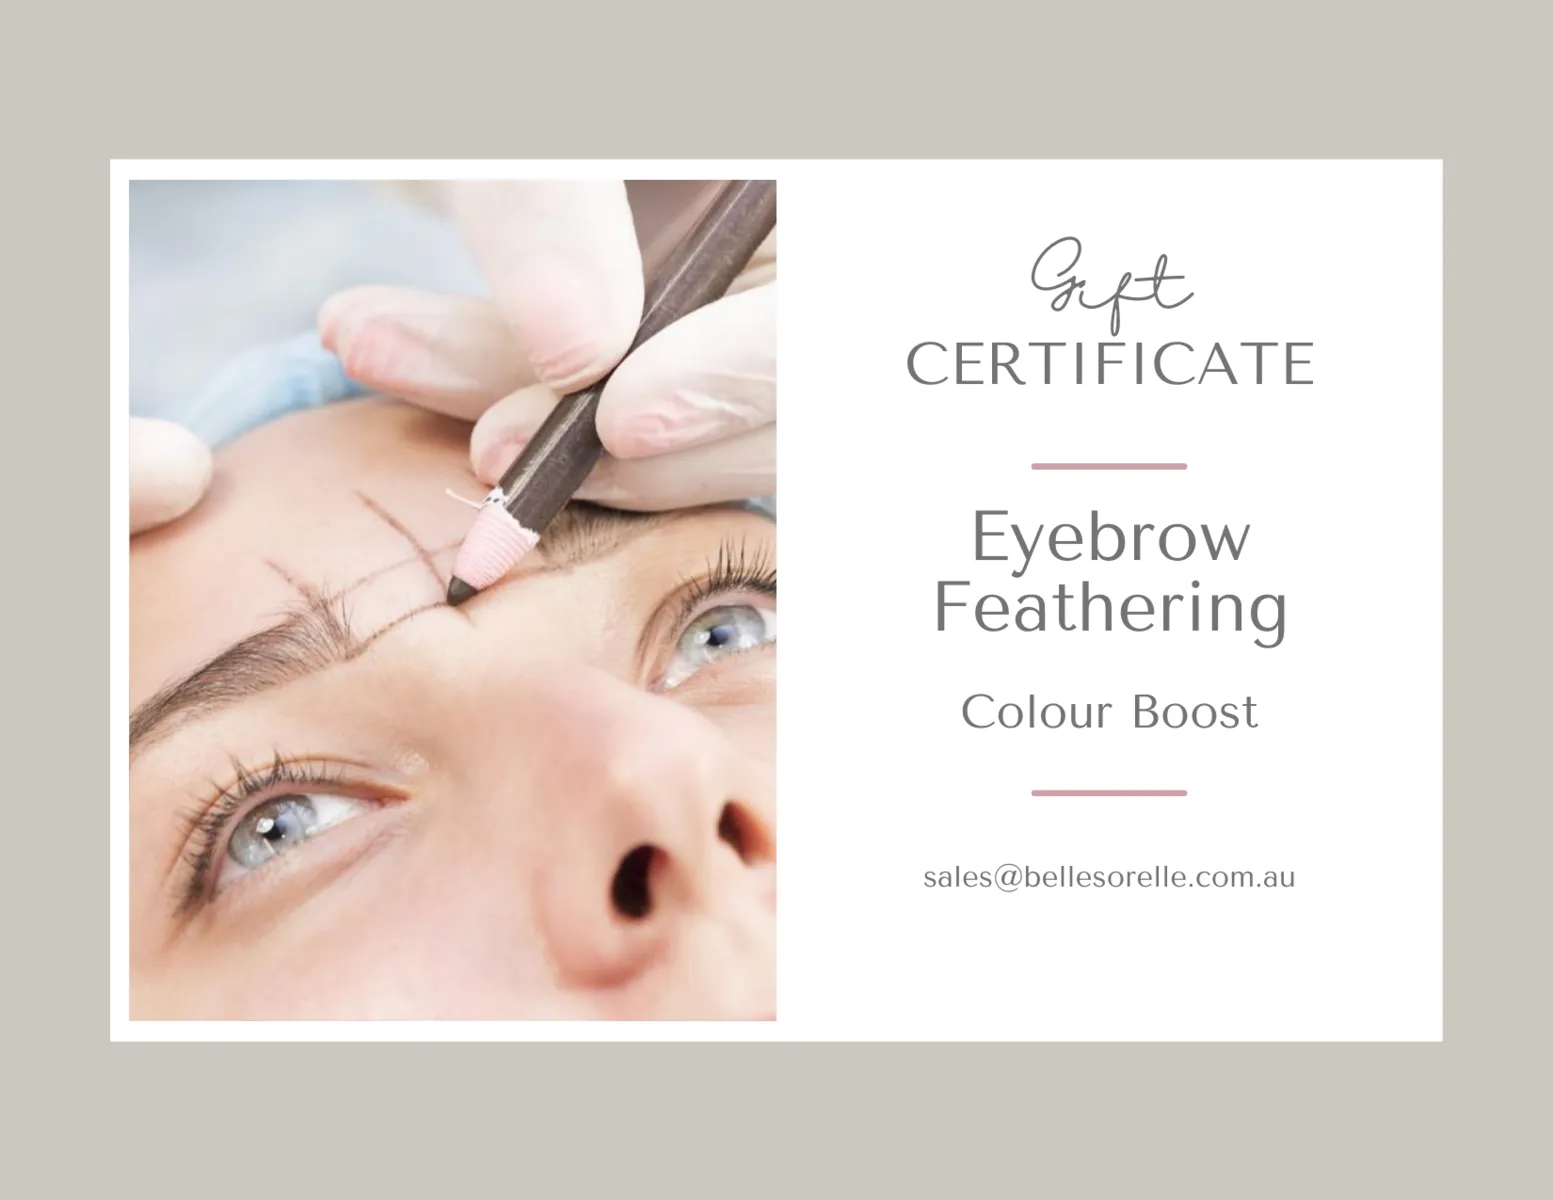 Eyebrow Feathering - 2 - 3 year Colour Boost